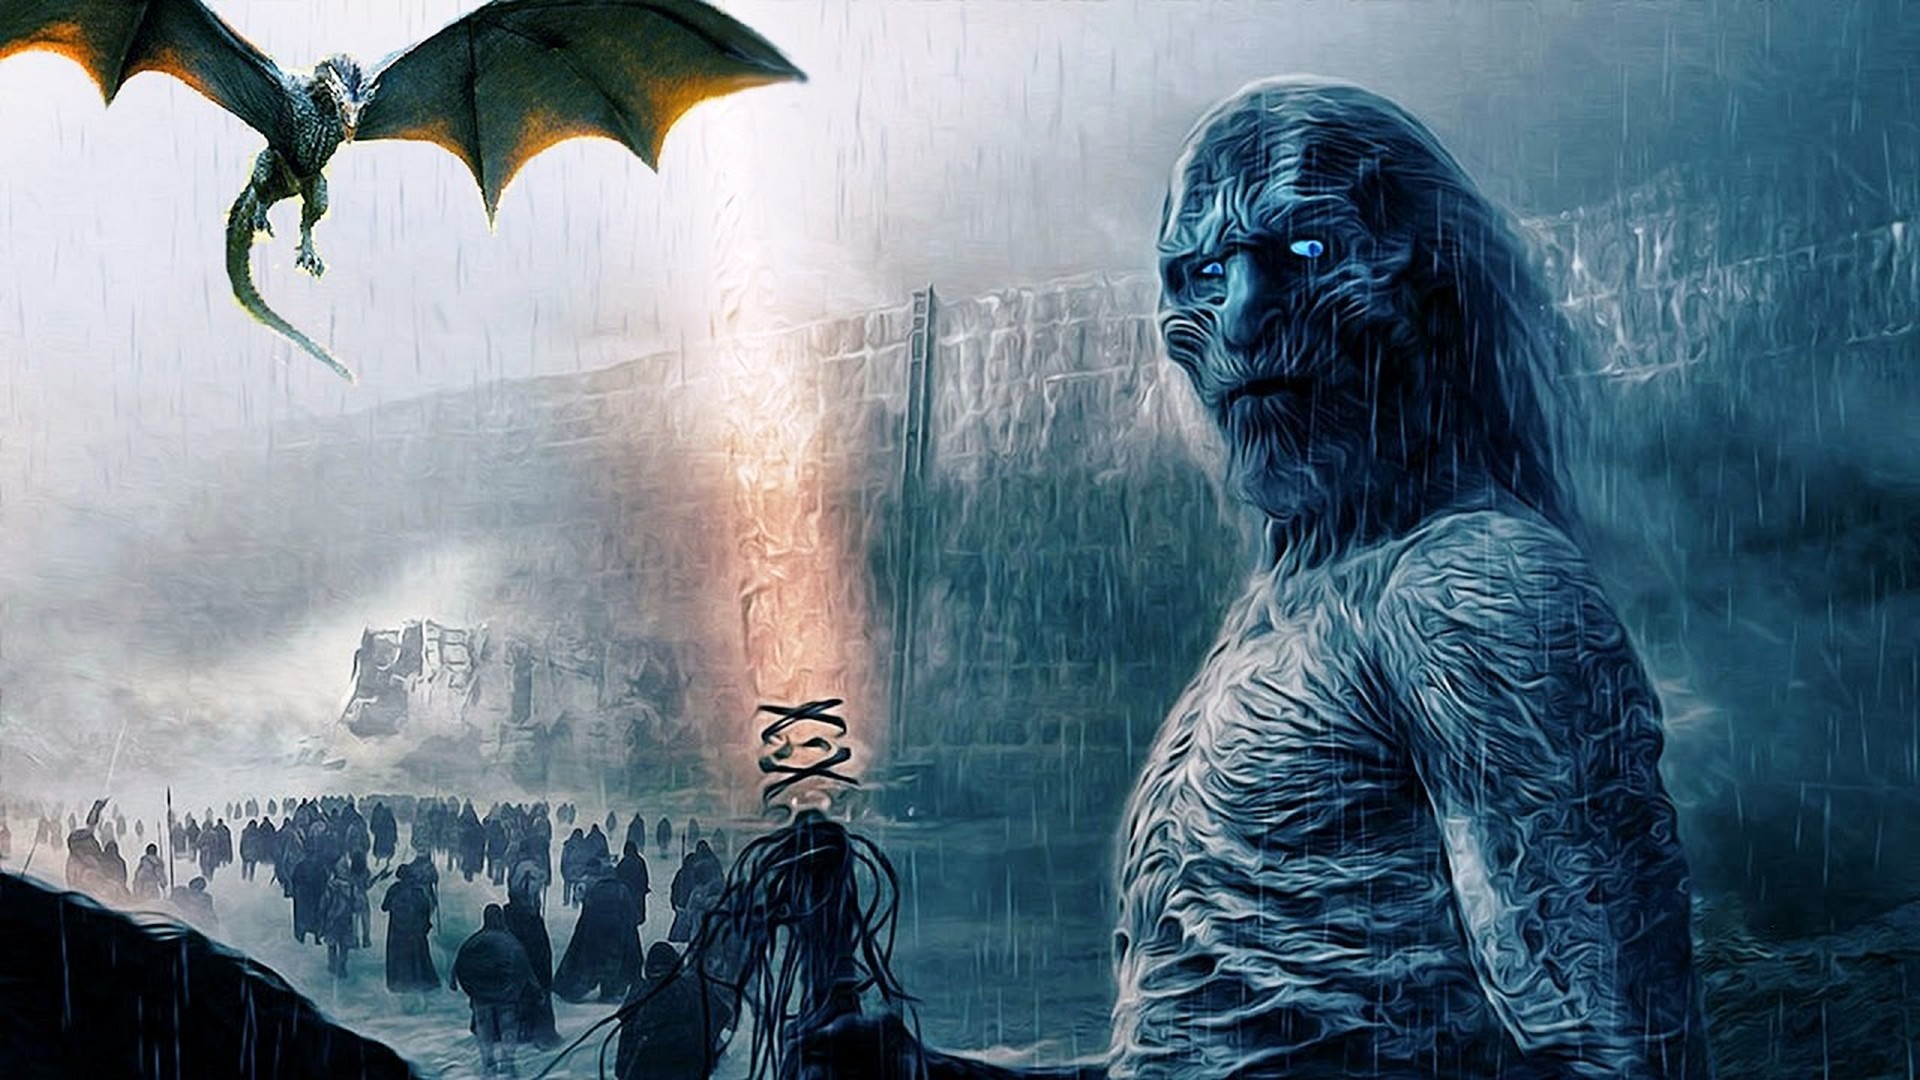 Game Of Thrones White Walkers Wallpaper Hd With High-resolution - Game Of  Thrones Season 7 Episode 7 Leak - 1920x1080 Wallpaper 